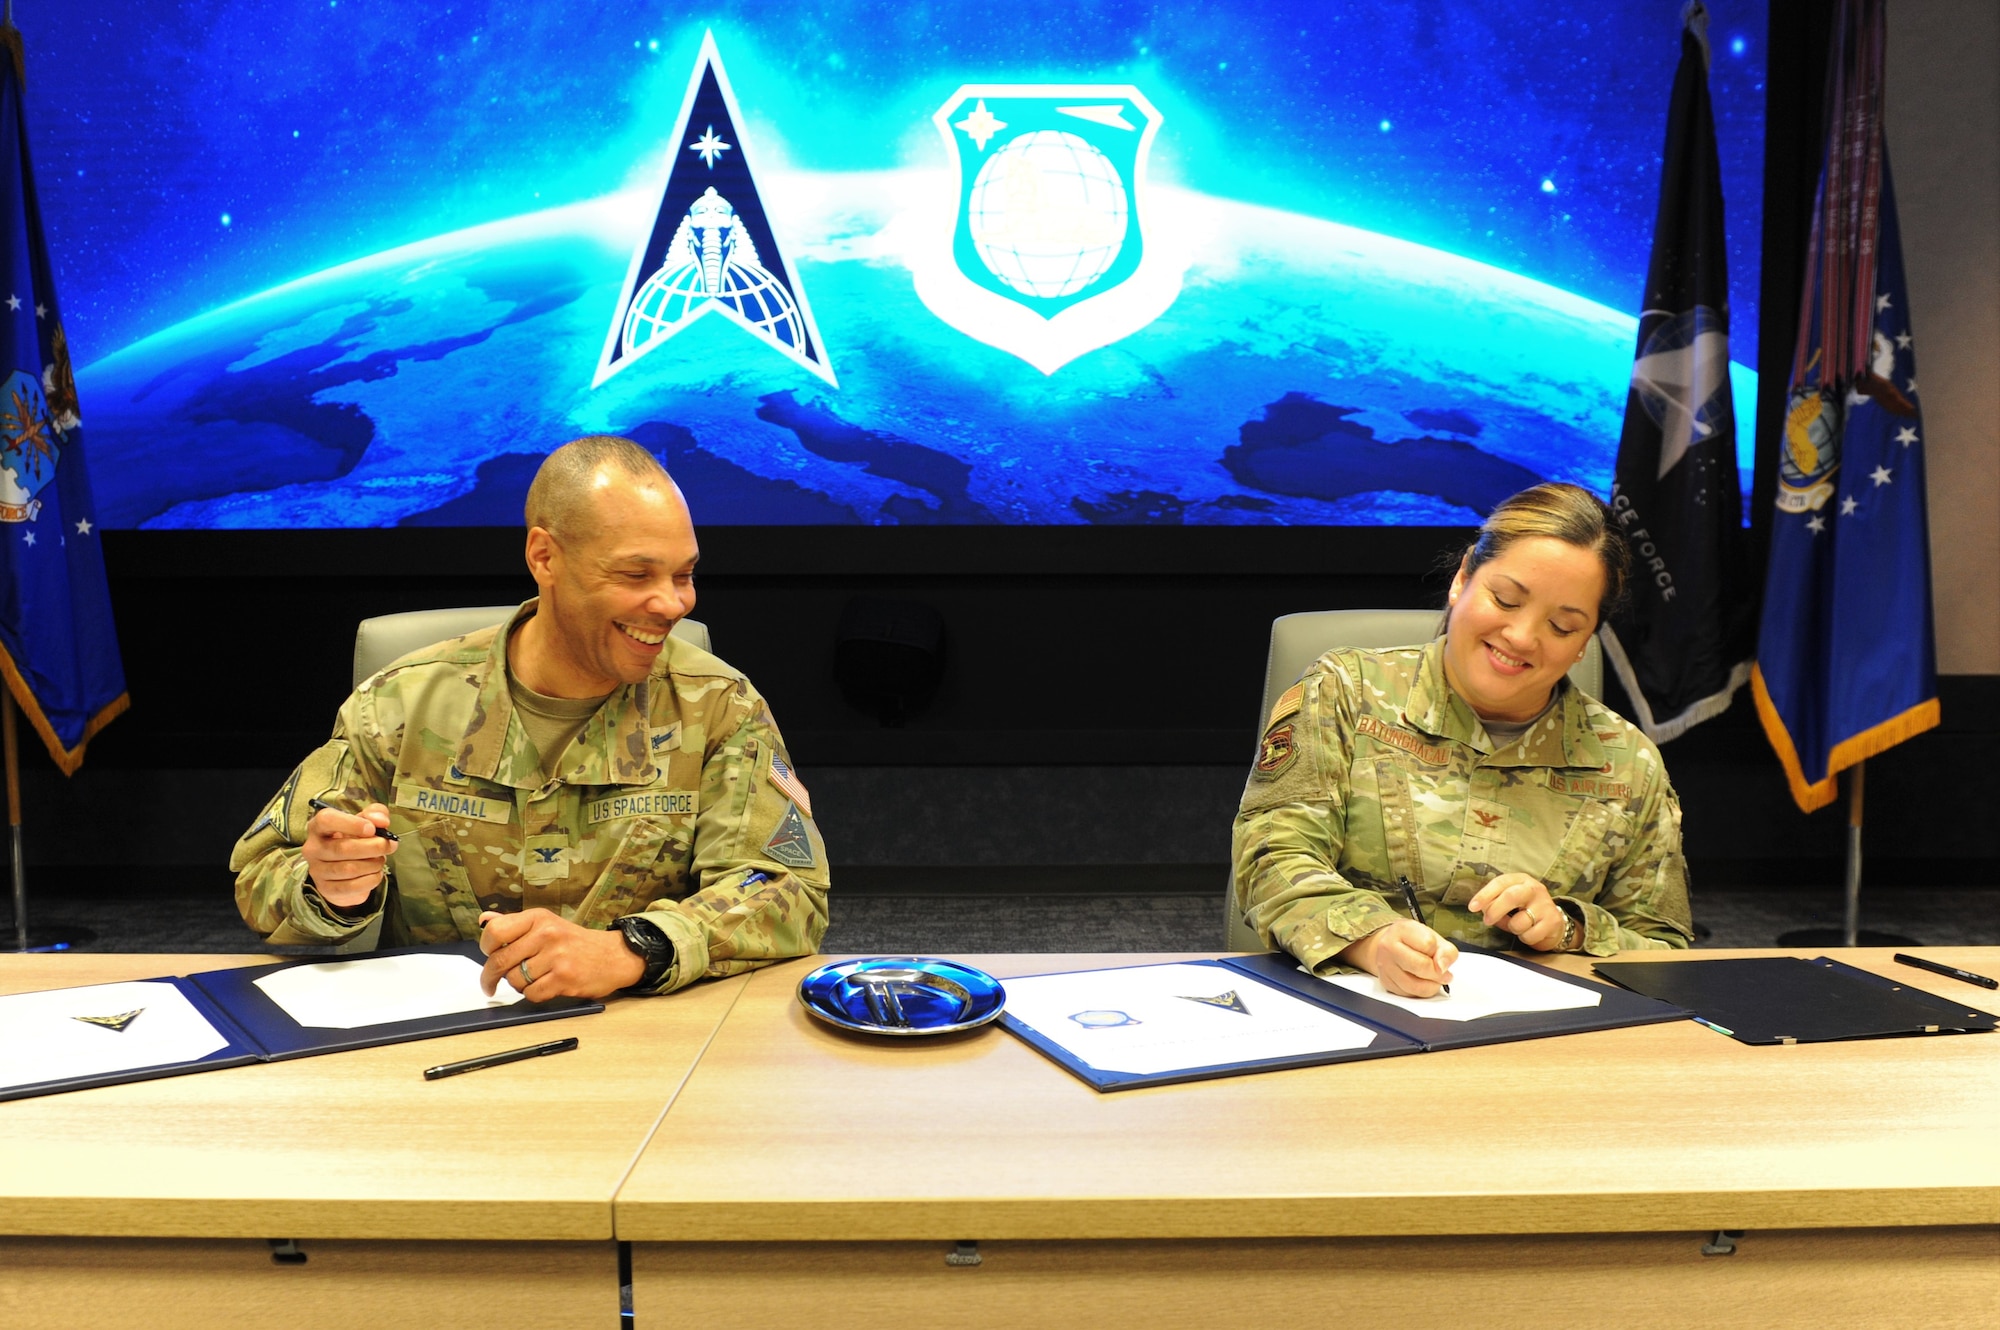 Col. Marqus D. Randall, National Space Intelligence Center commander, and Col. Ariel G. Batungbacal, National Air and Space Intelligence commander, share a laugh as they sign a Memorandum of Agreement at Wright-Patterson Air Force Base, Ohio, Feb. 10, 2023. During the MOA signing ceremony, the two commanders pledged continued integration and teamwork between the two Centers as they work together to make foundational discoveries that help keep the nation safe.